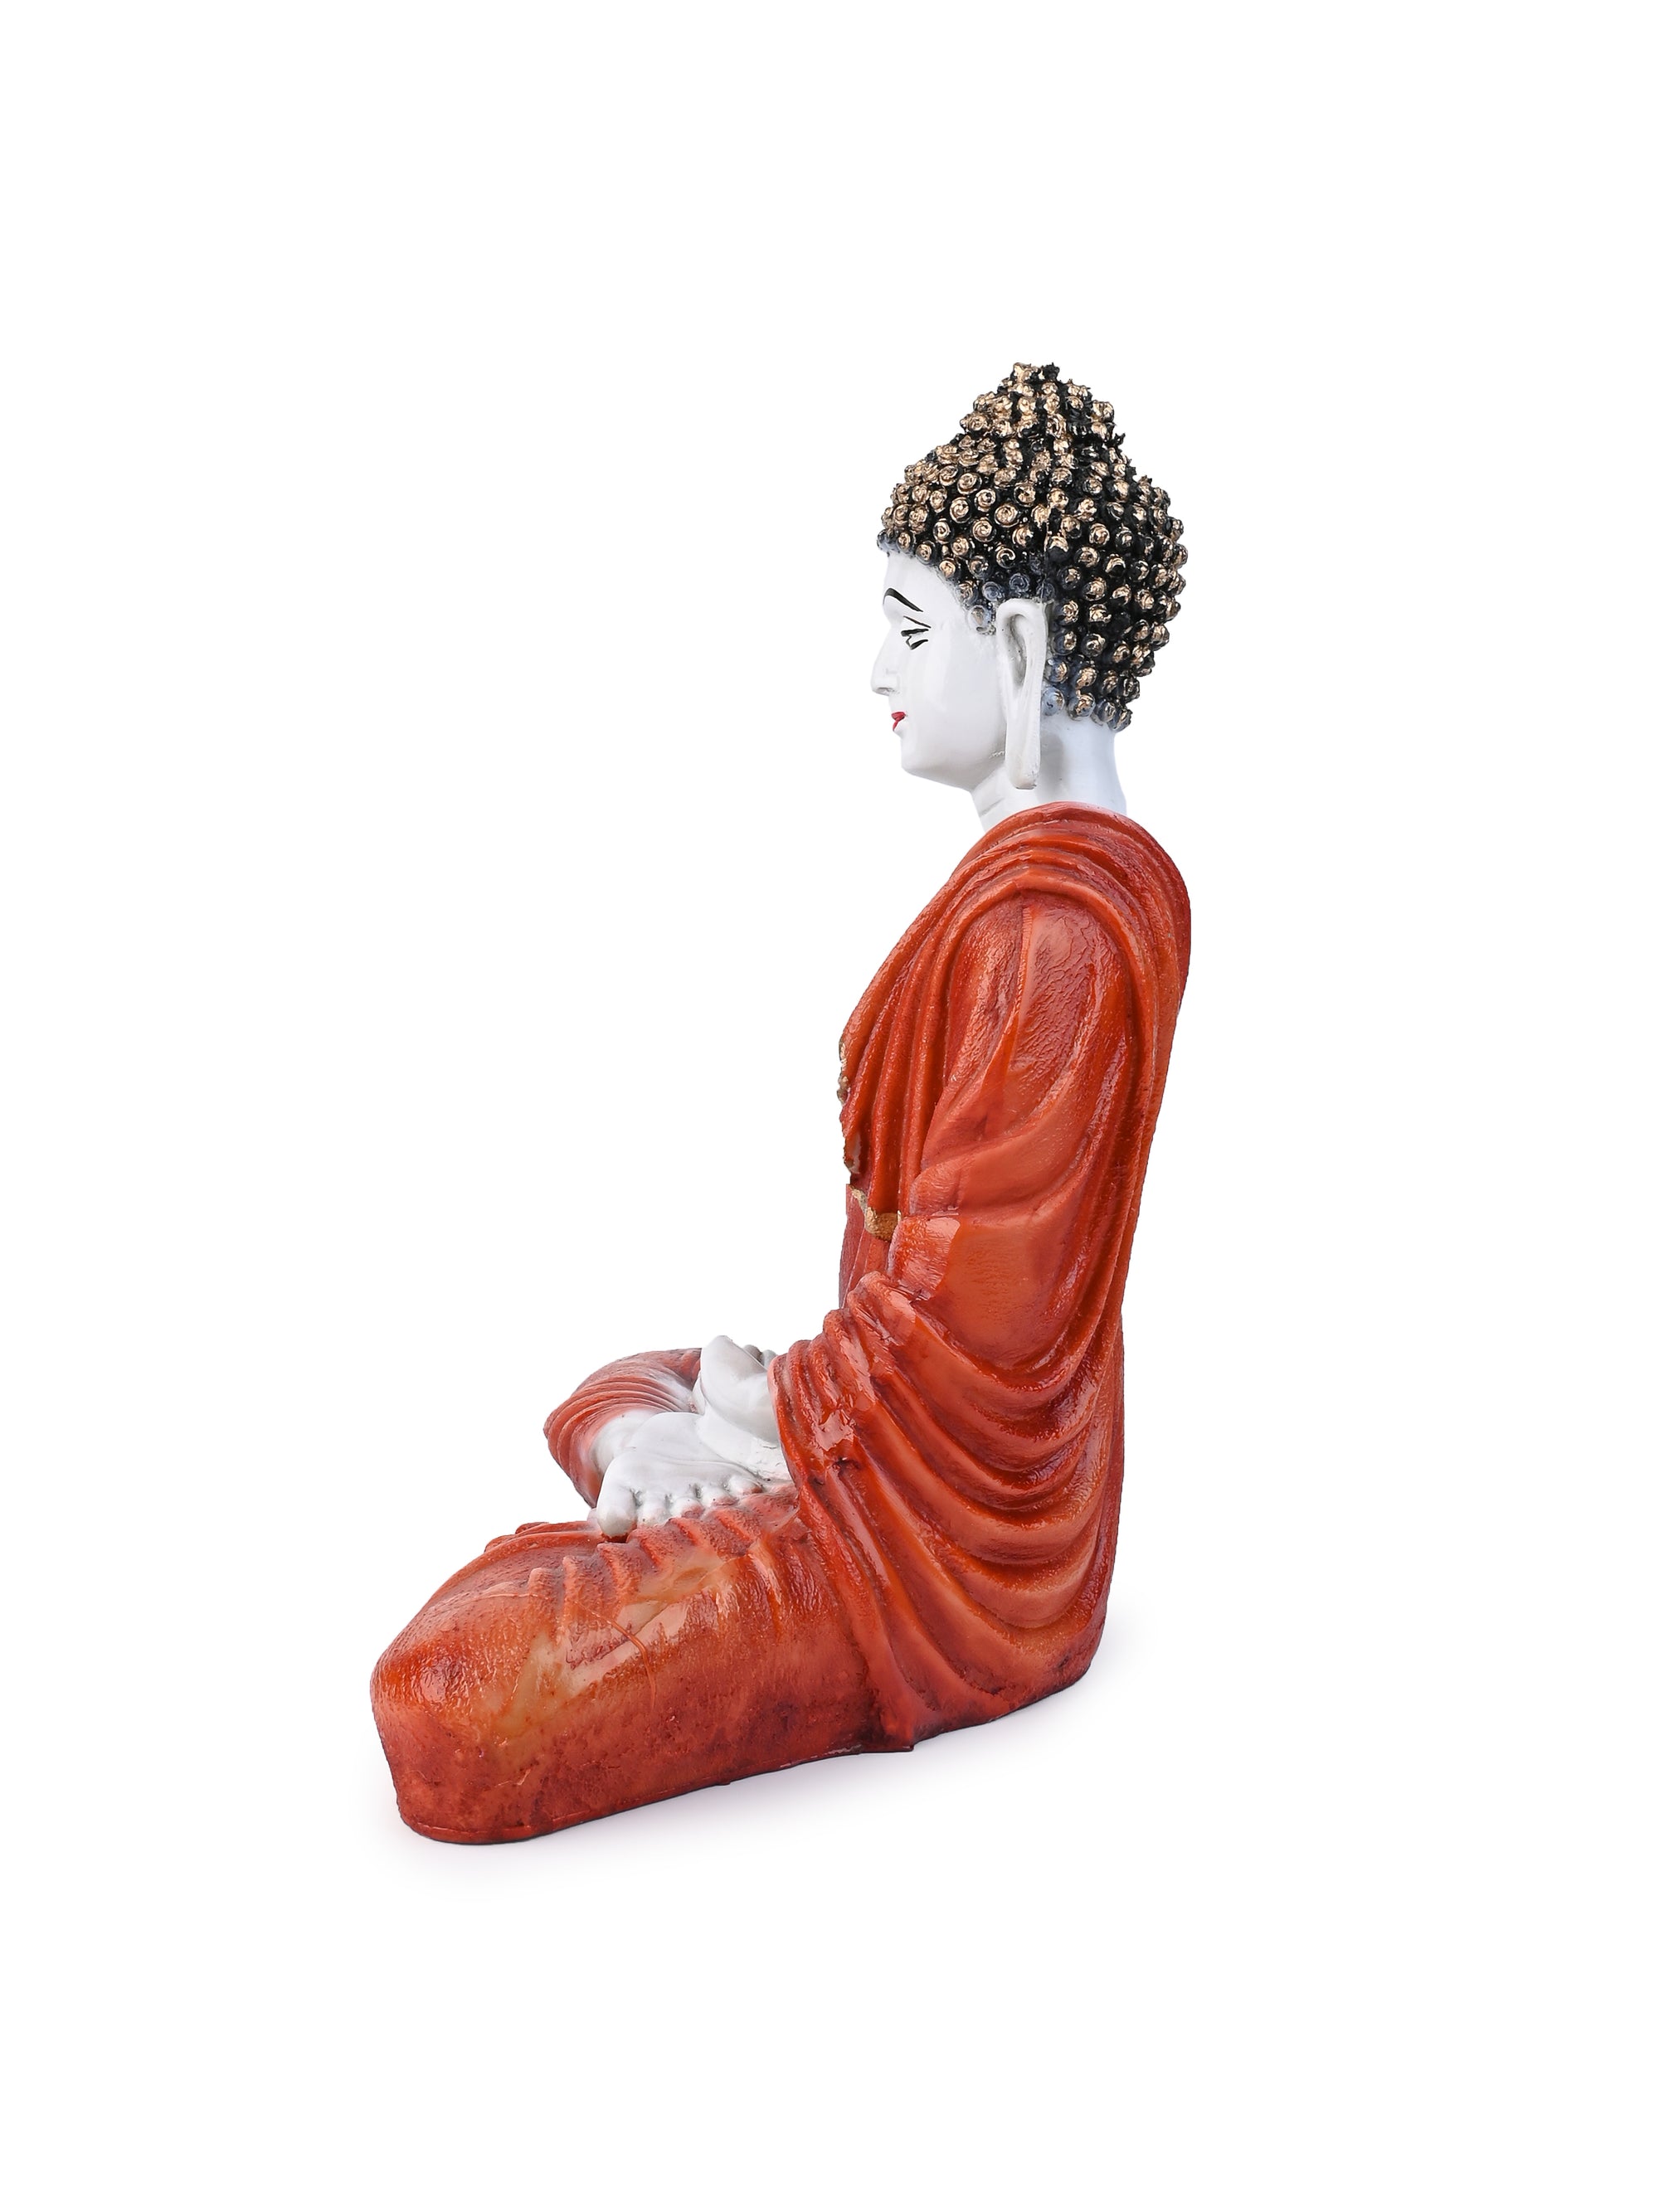 Resin Crafted White and Orange Meditating Buddha Statue - 14 inches